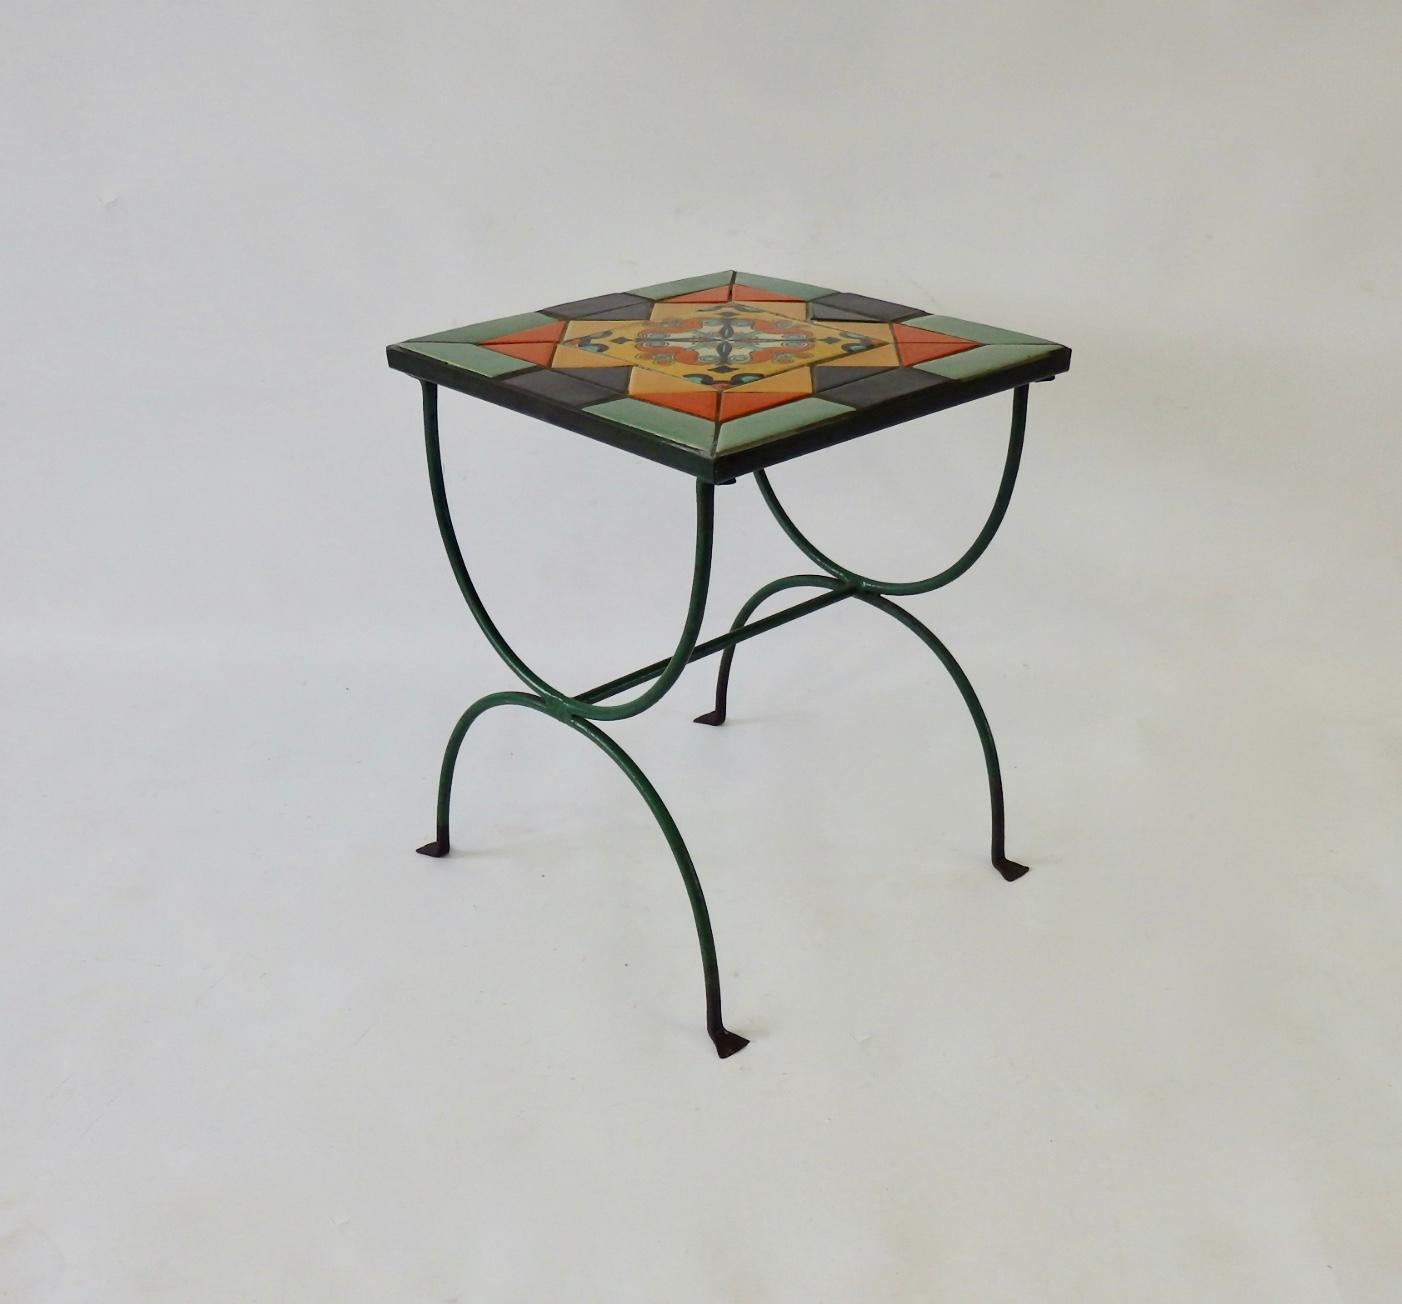 Spanish Colonial My Favourite California Tile Table in Wrought Iron Base